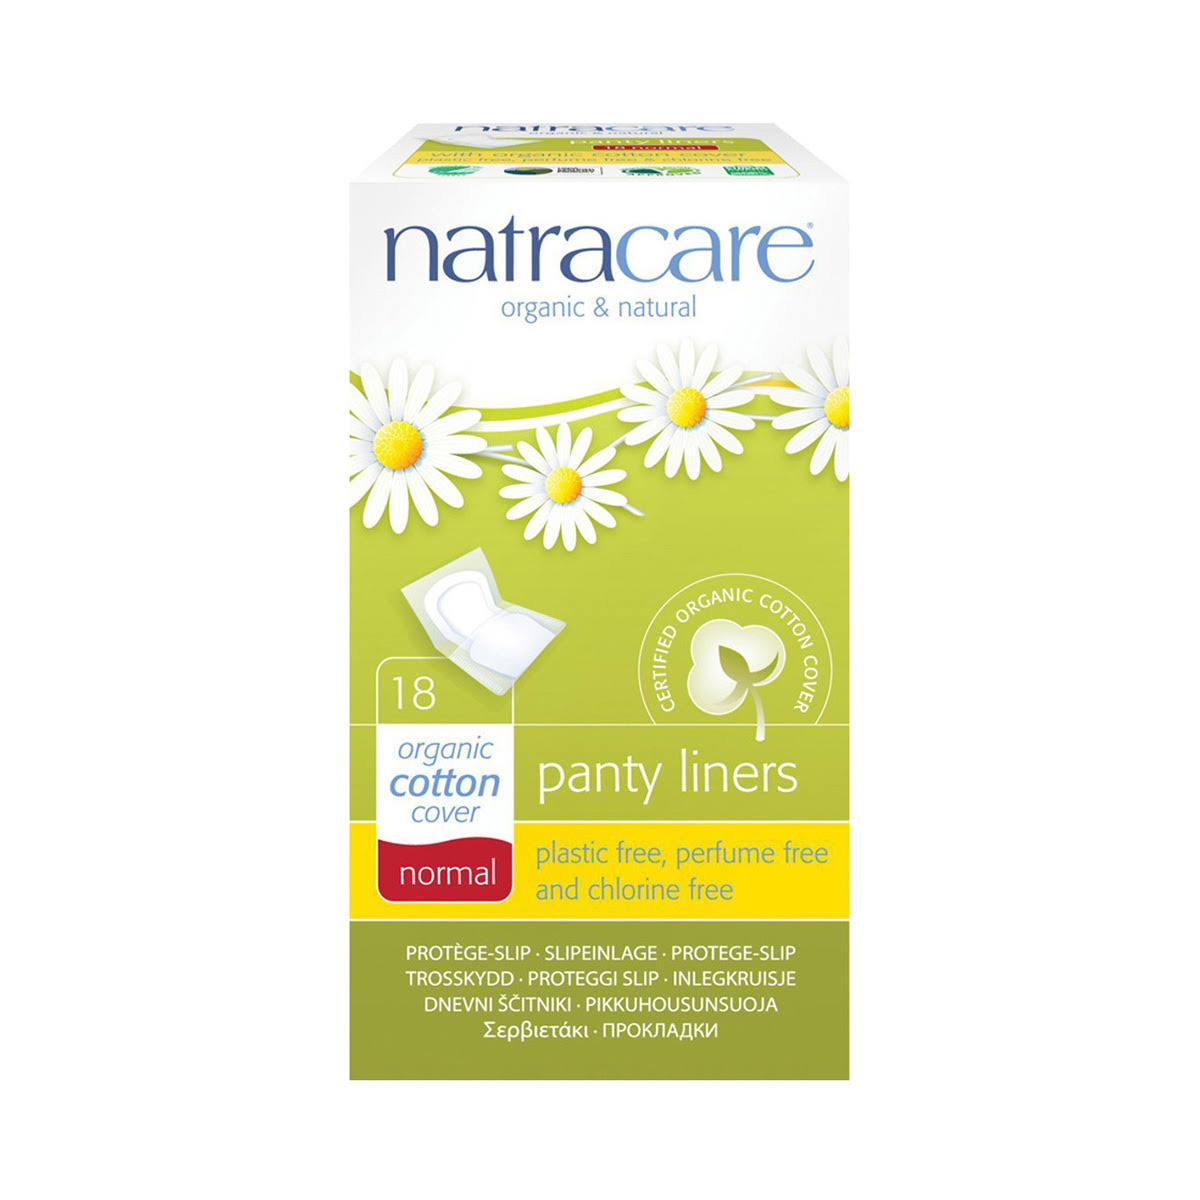 Natracare Organic Cotton Cover Panty Liners - Normal, 18ct